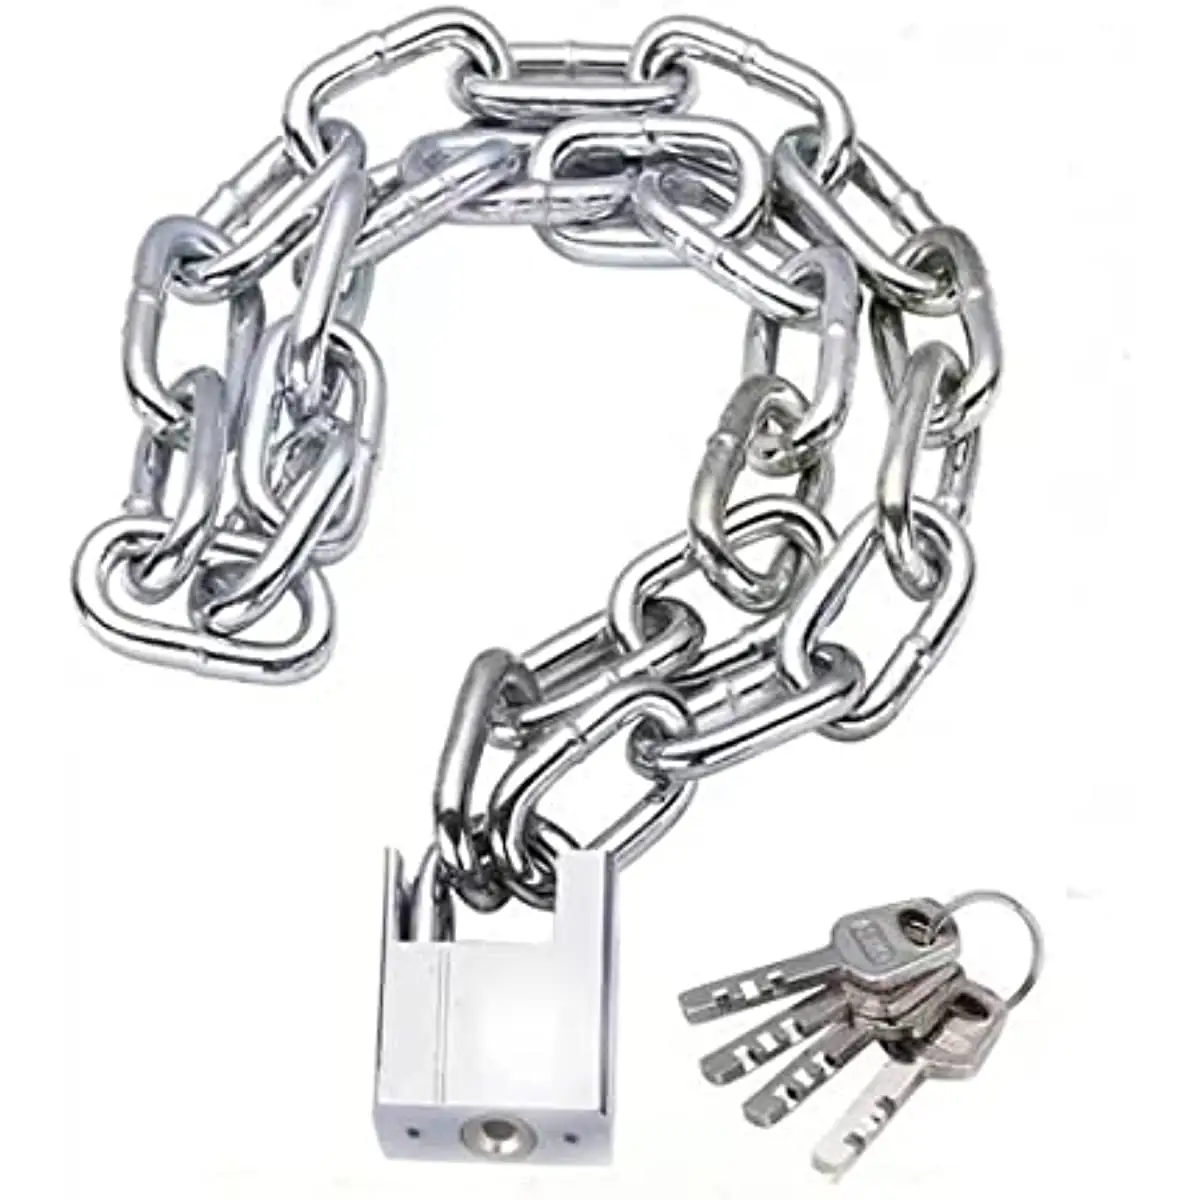 Bike Chain Lock, Cannot Be Cut with Bolt Cutters Or Hand Tools, Premium Case-Hardened Security Chain for Motorcycles, Bike